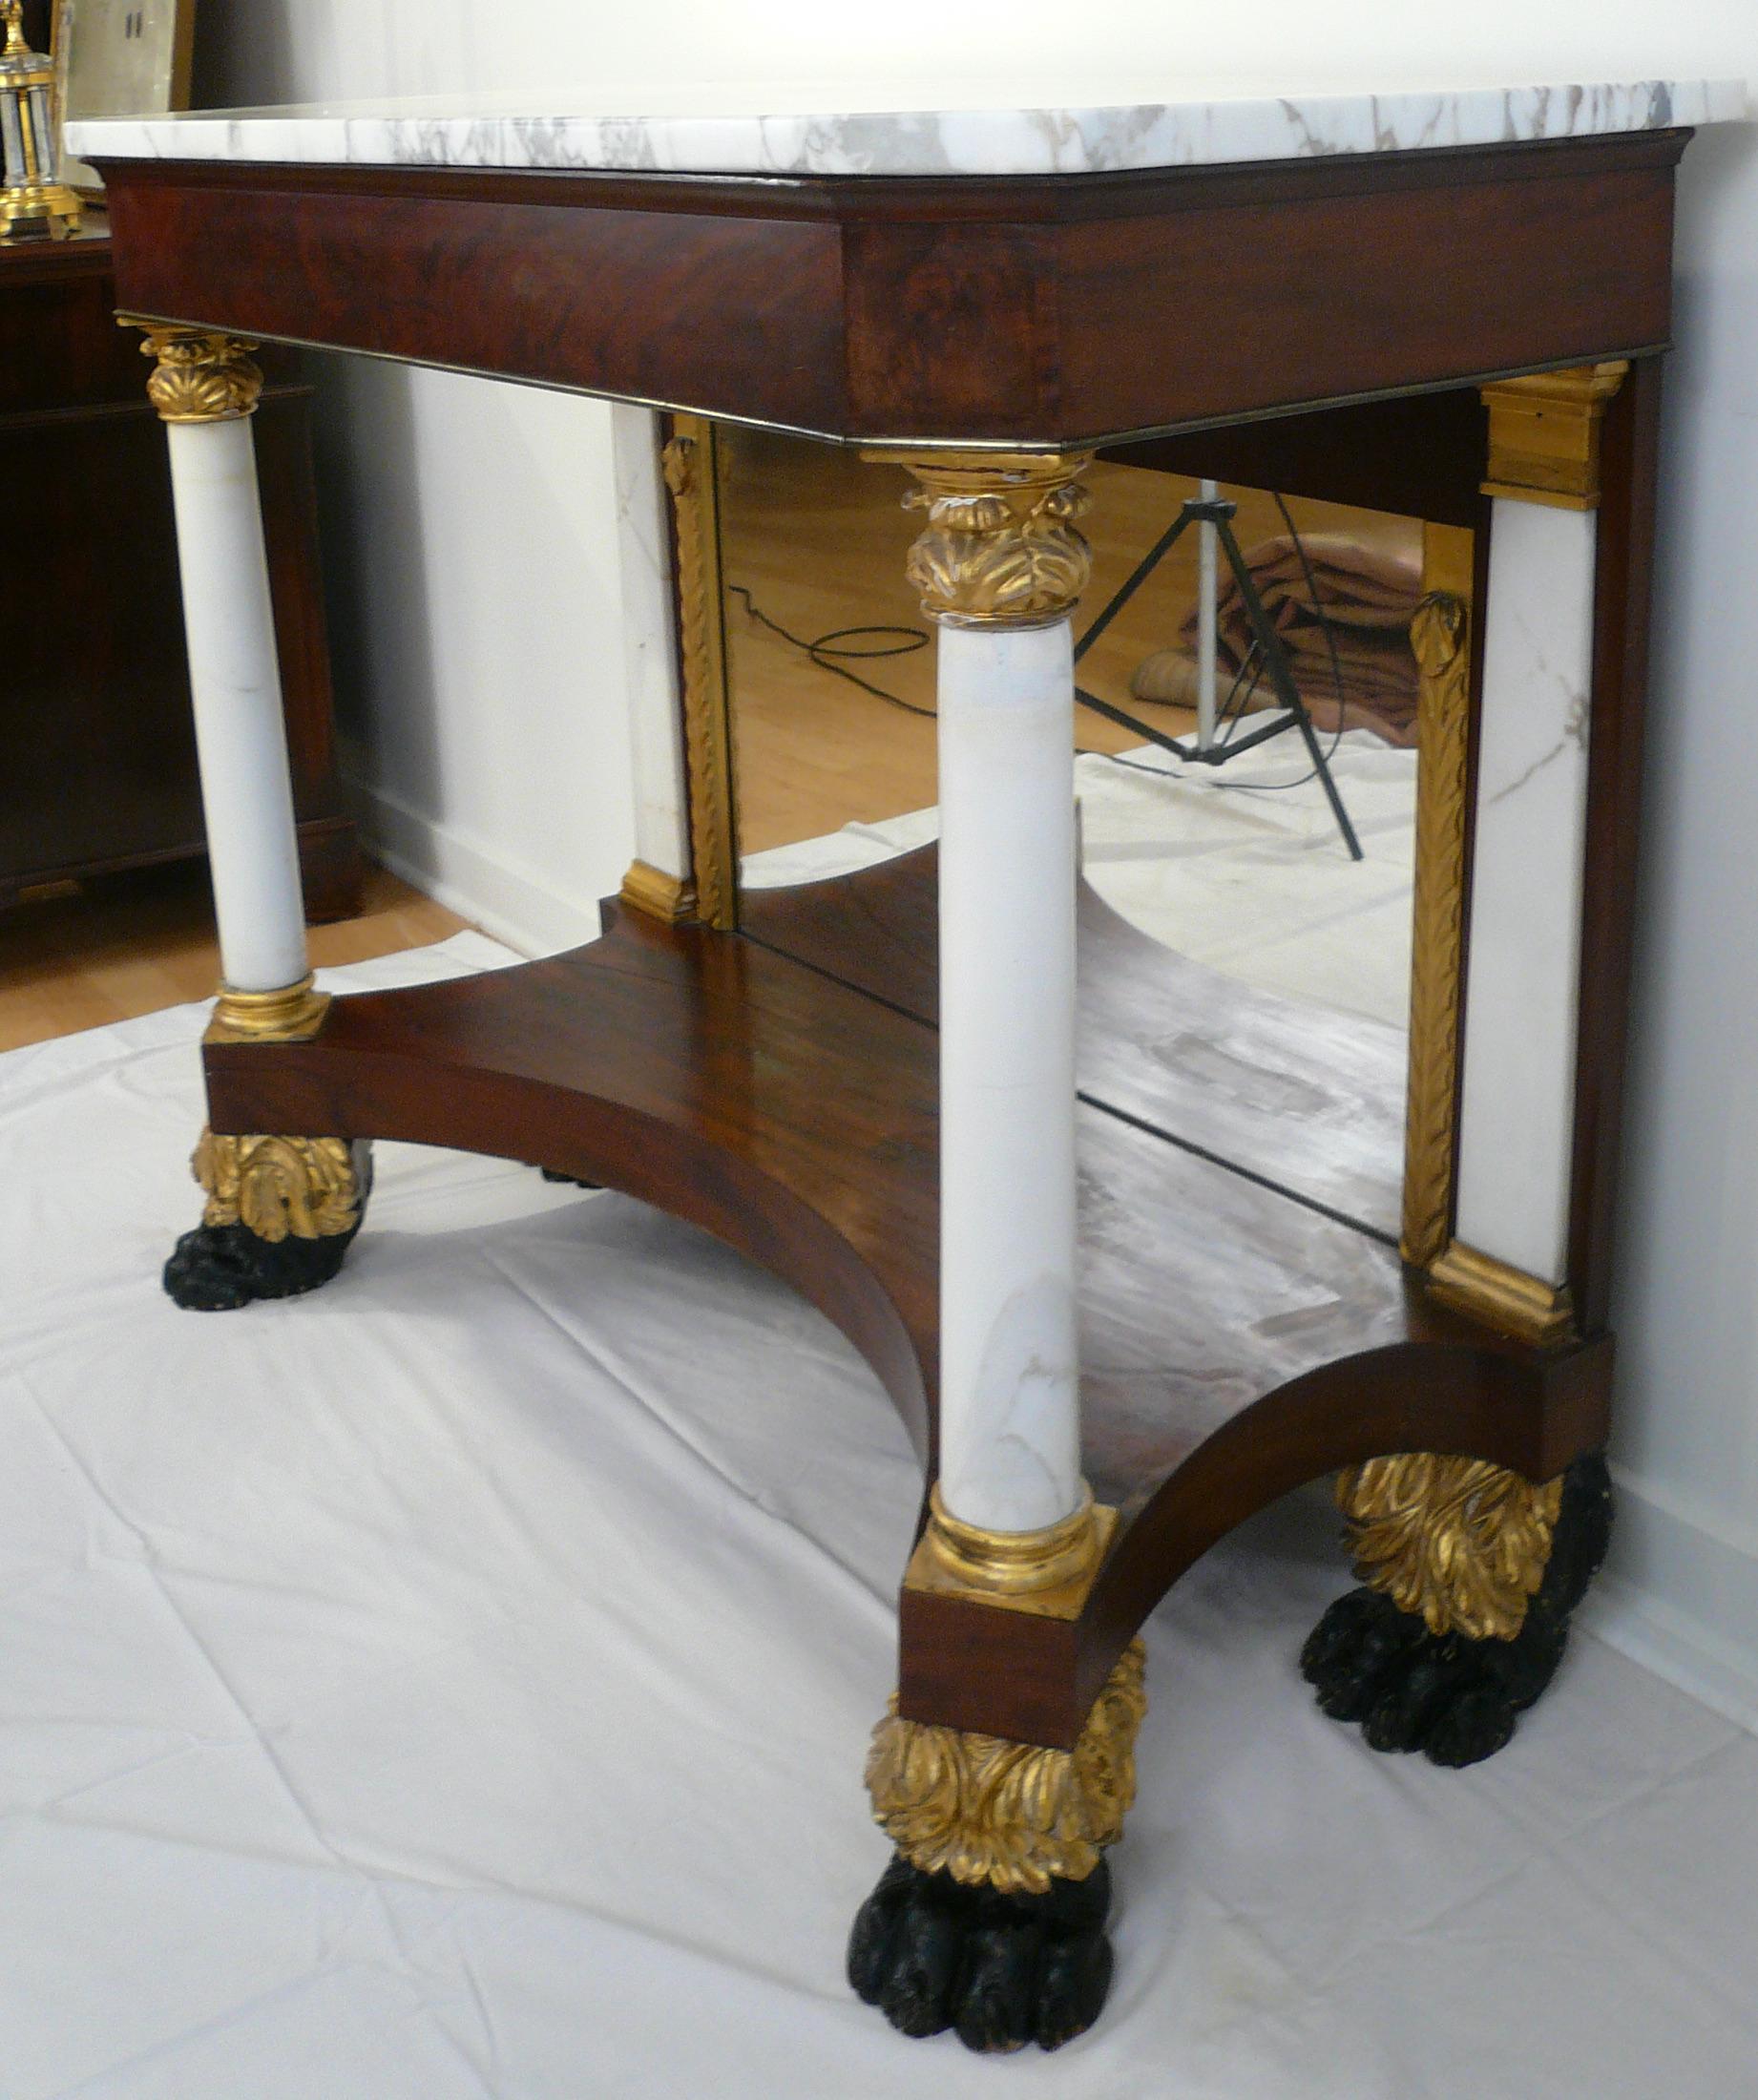 This American Classical pier table, was made in New York circa 1820.
Retaining its original marble top and mirror, the table has white marble columns and pilasters, with carved gilt wood capitals and bases.
The hairy paw feet are accented by gilt